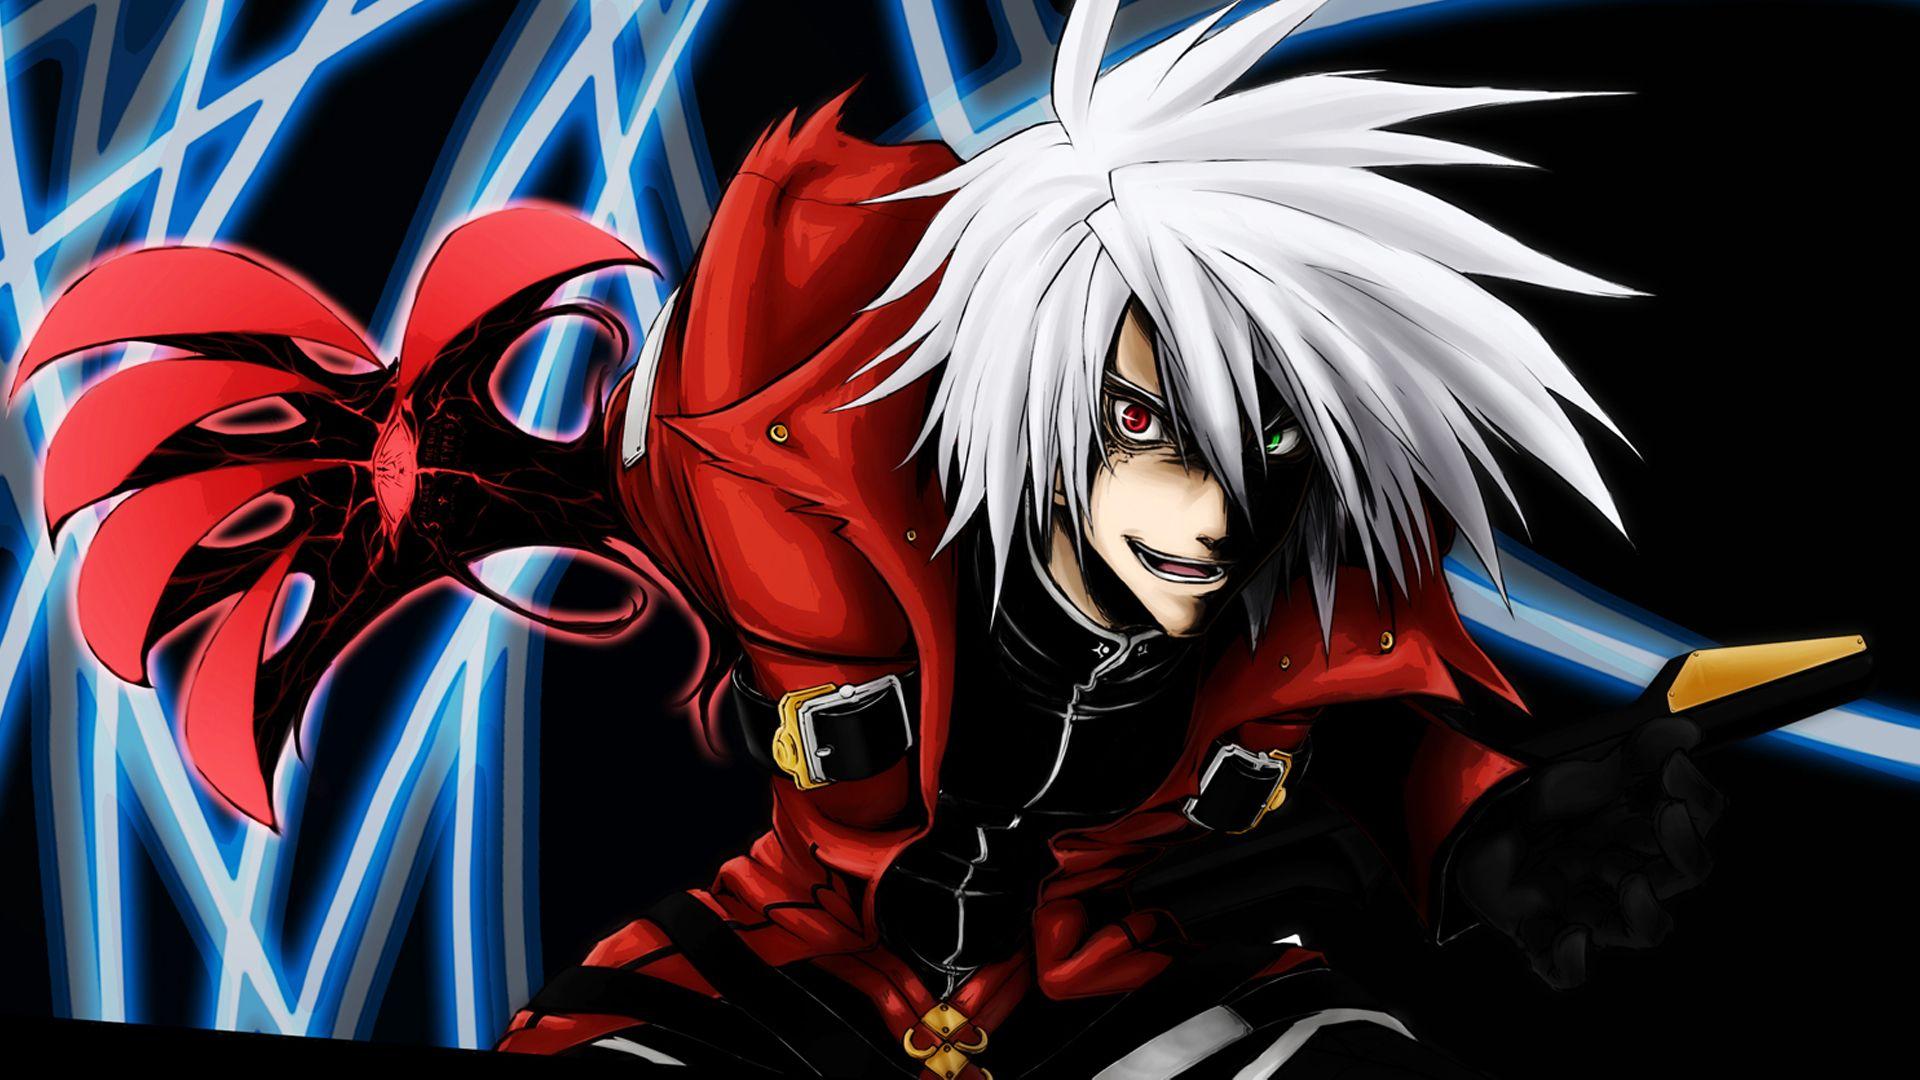 BlazBlue: Calamity Trigger screenshots, image and picture